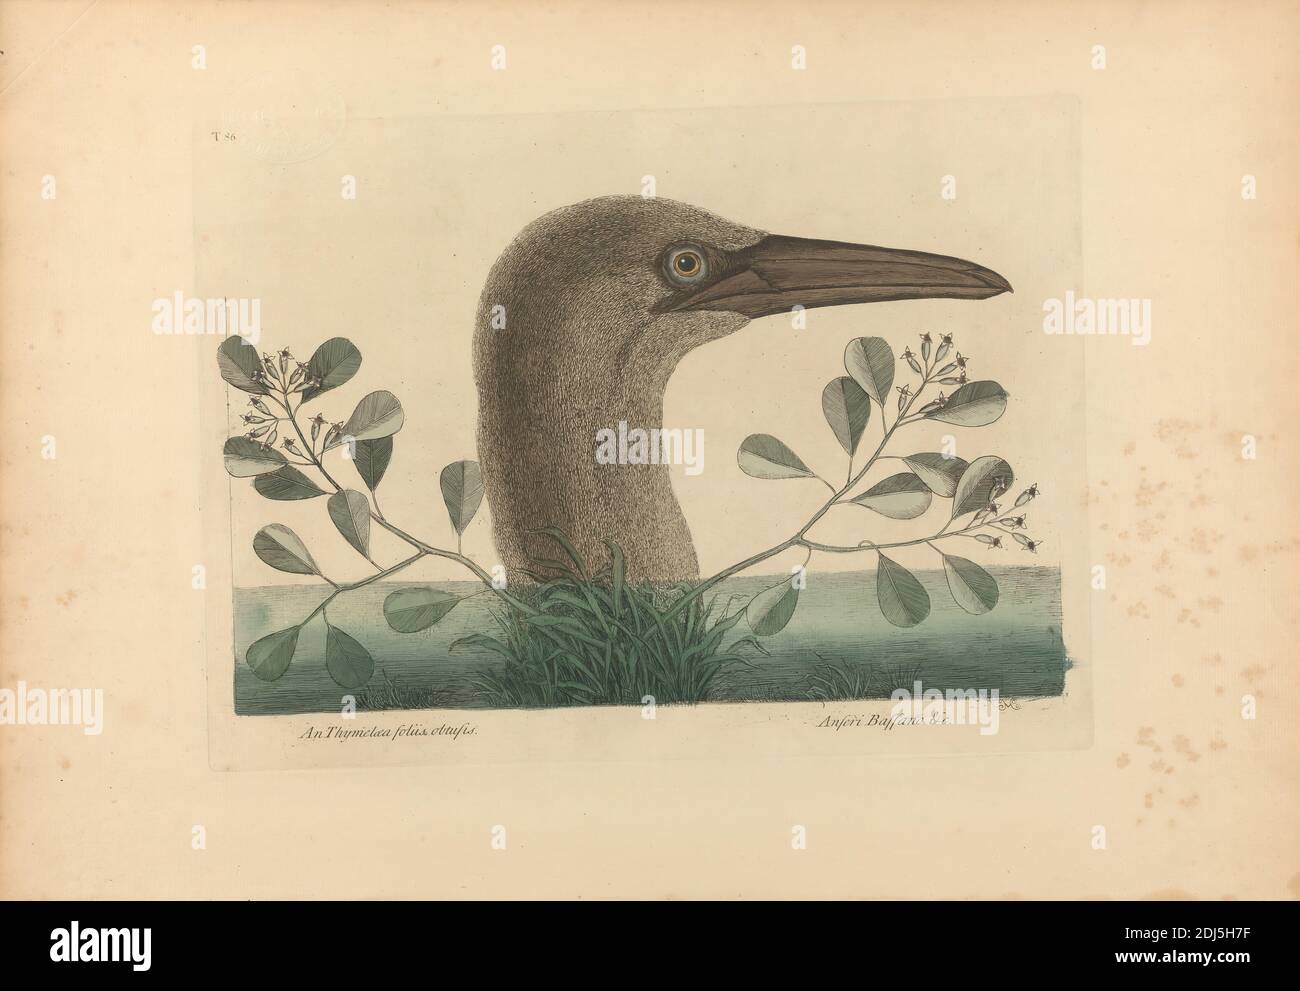 An Thymelaea foliis obtusis; Anseri Bassano &c: The Great Booby, Plate 86 from the 'Natural History of Carolina, Florida and the Bahama Islands', volume I, 2nd edition, London 1754, Print made by Mark Catesby, 1682–1749, British, 1754, Aquatint etching and engraving with original hand coloring on medium, moderately textured, cream laid paper, Sheet: 14 3/8 x 20 1/2 inches (36.5 x 52.1 cm), animal art, bird, plants Stock Photo